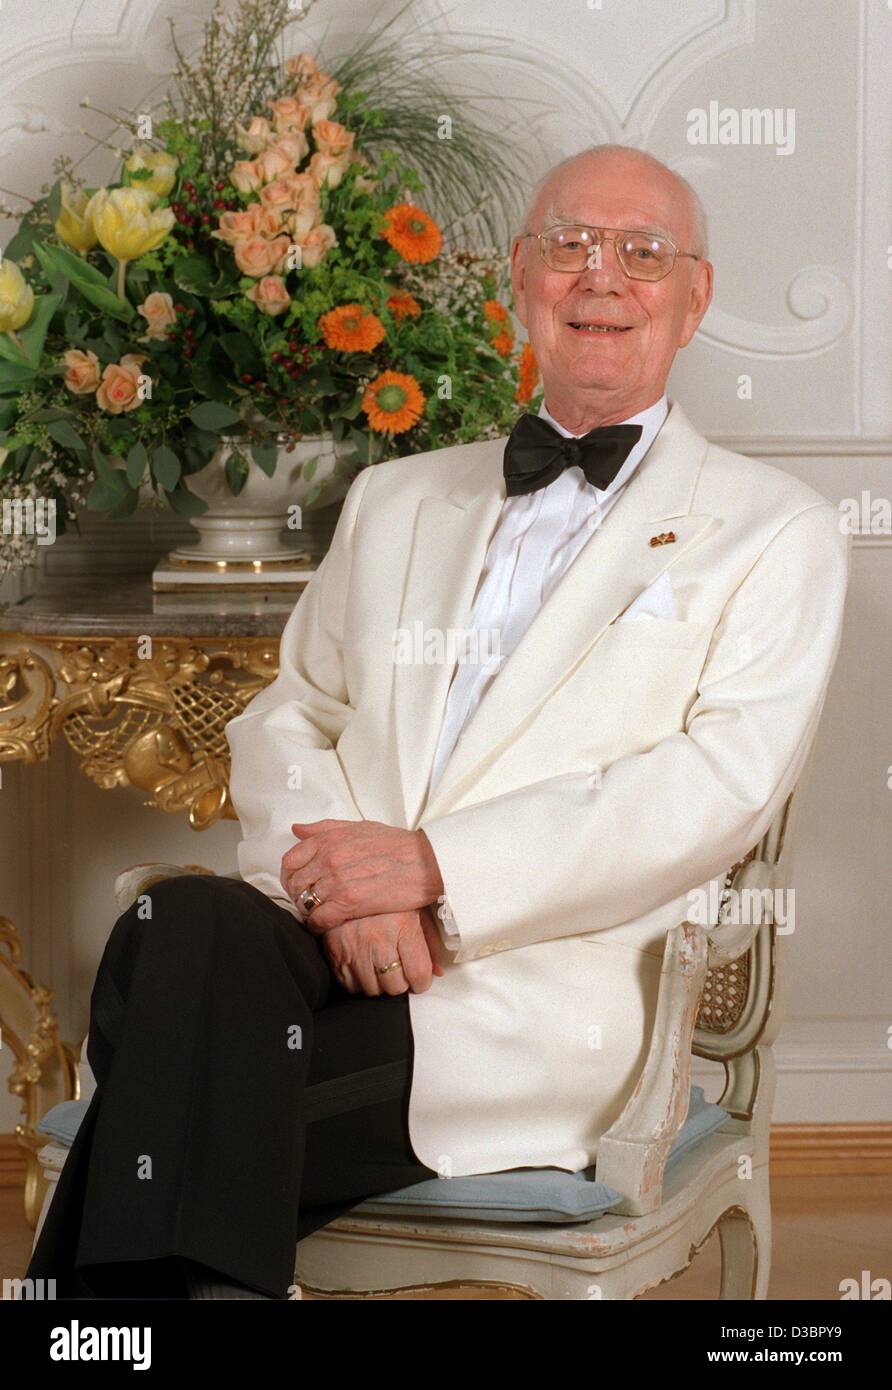 (dpa files) - Count Lennart Bernadotte smiles while sitting in a chair in his castle on the island of Mainau in Lake Constance, Germany, 14 March 1997. Count Lennart Bernadotte died on 21 December 2004 at age 95. The Mainau administration said he had died peacefully surrounded by his family in his i Stock Photo